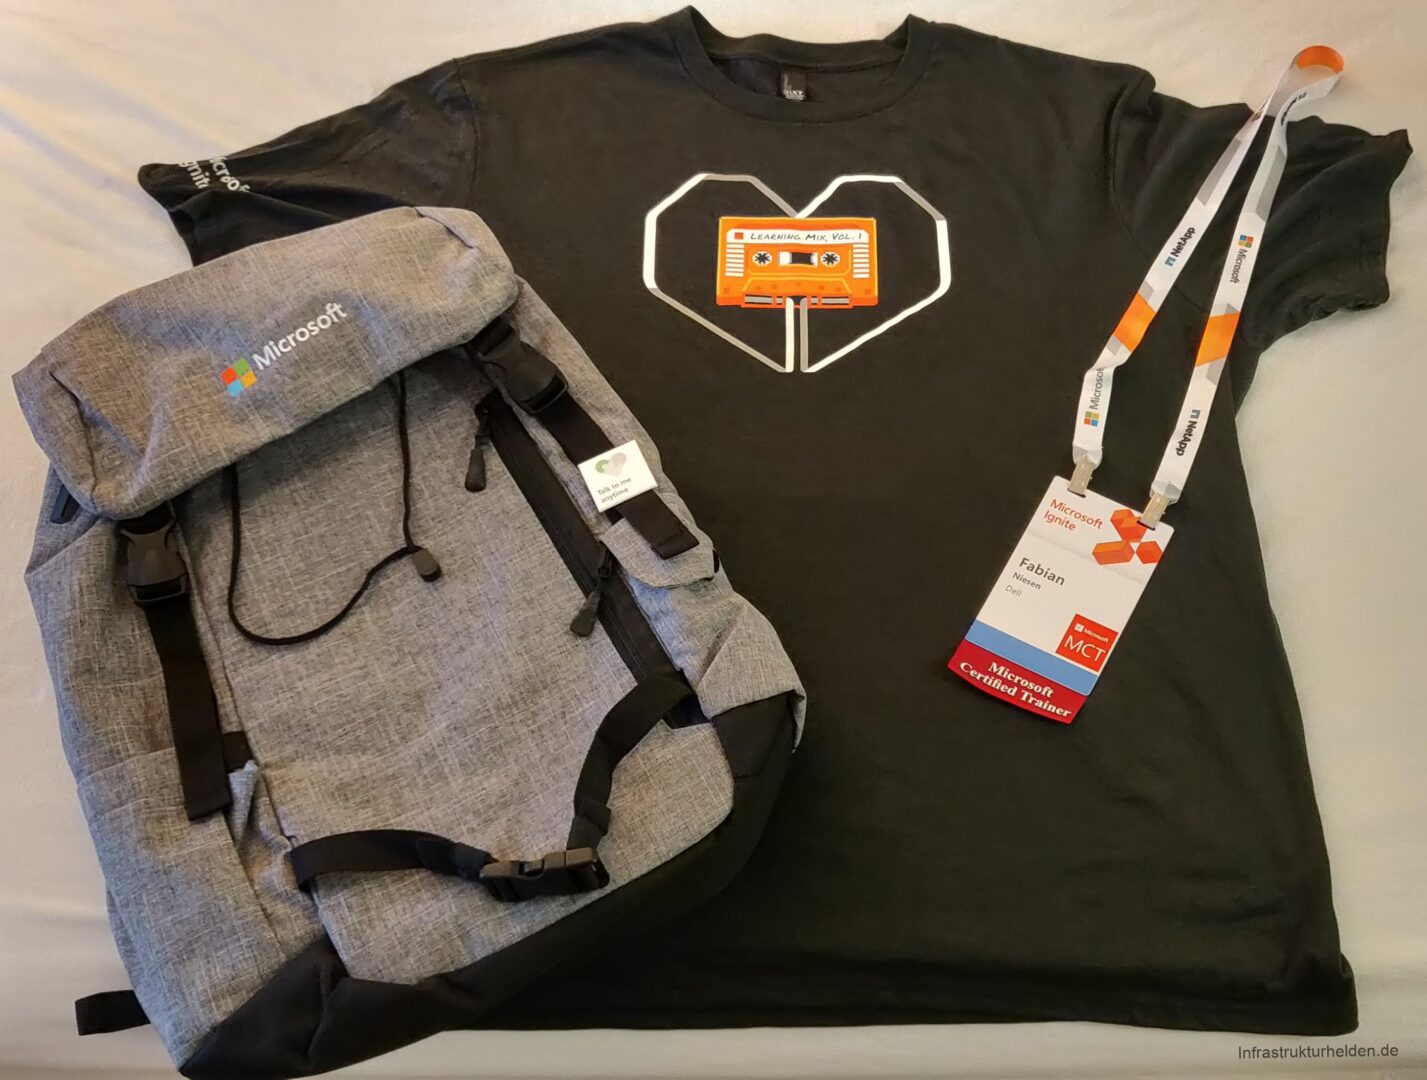 Ignite Stuff: Badge, Backpack and T-Shirt "Learning Mix Vol.1"